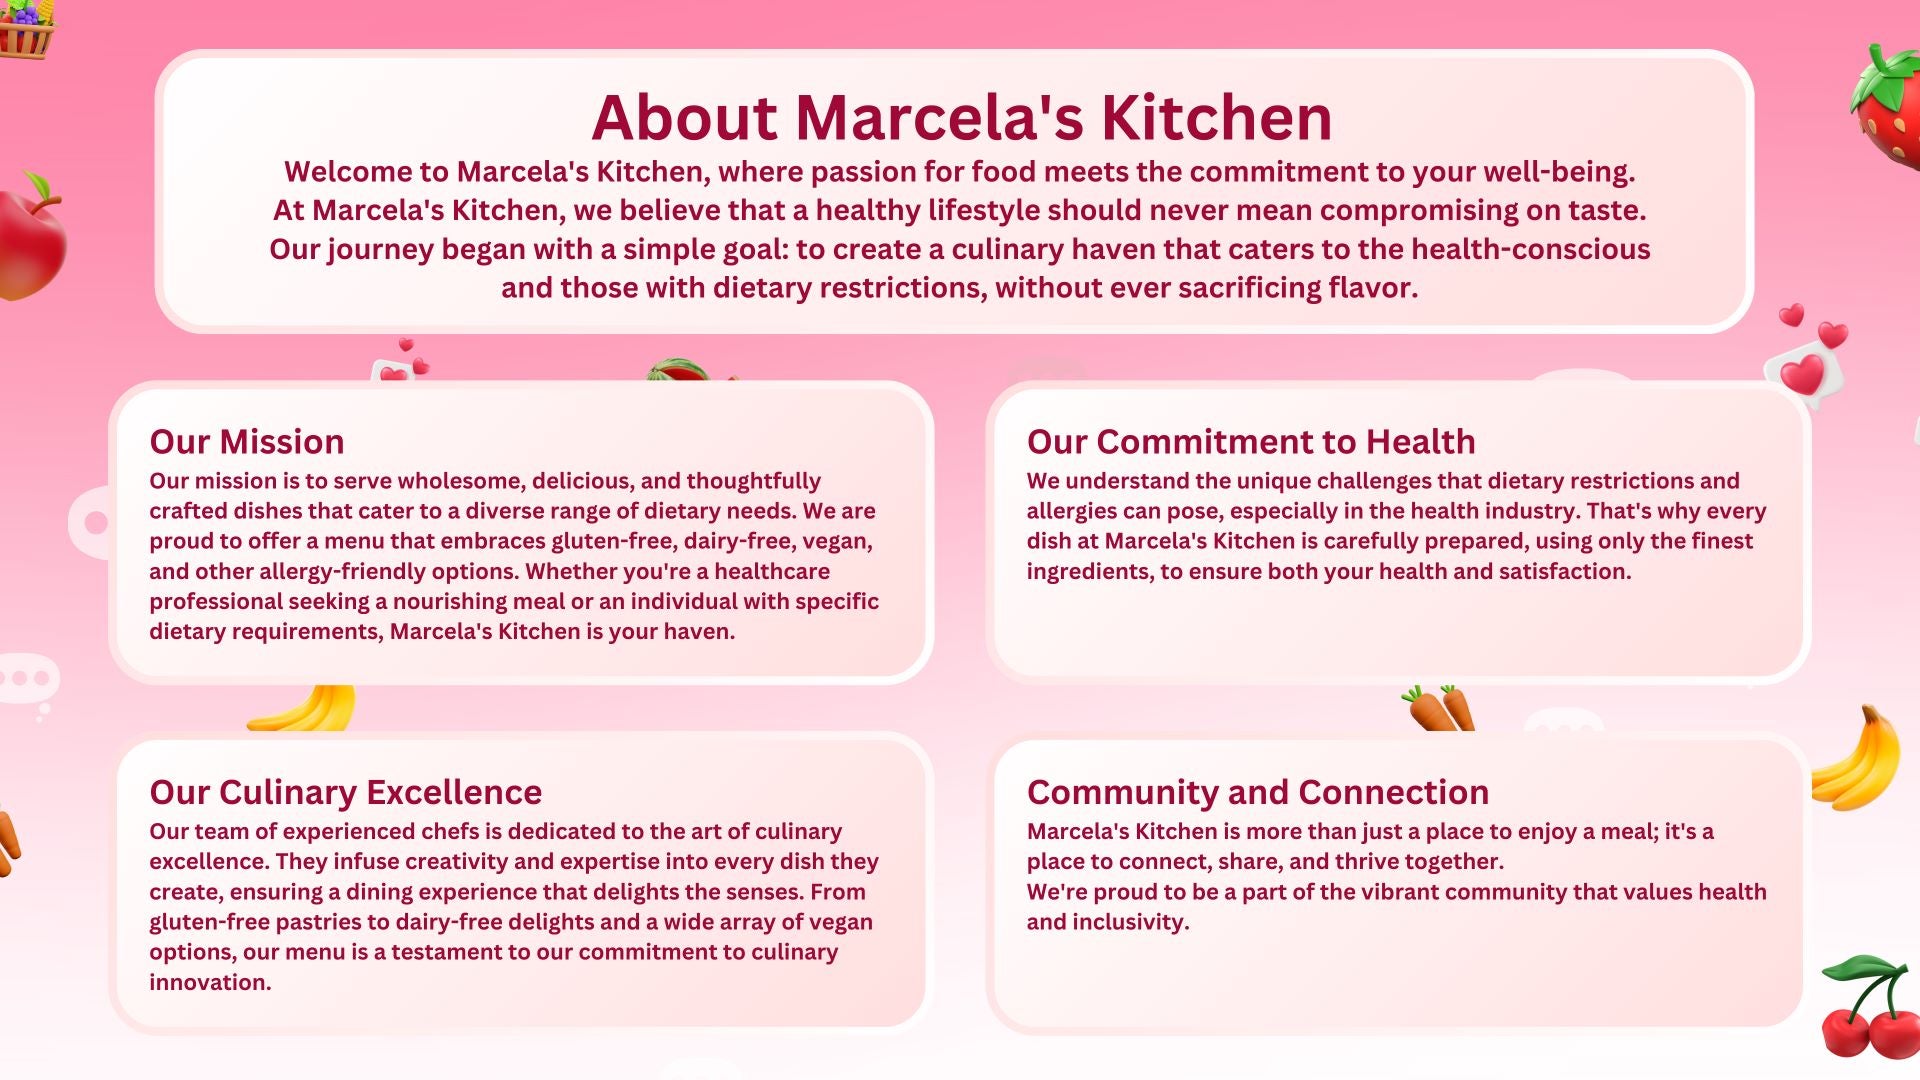 Delicious_and_healthy_Marcela_s_Kitchen_nails_it_every_time